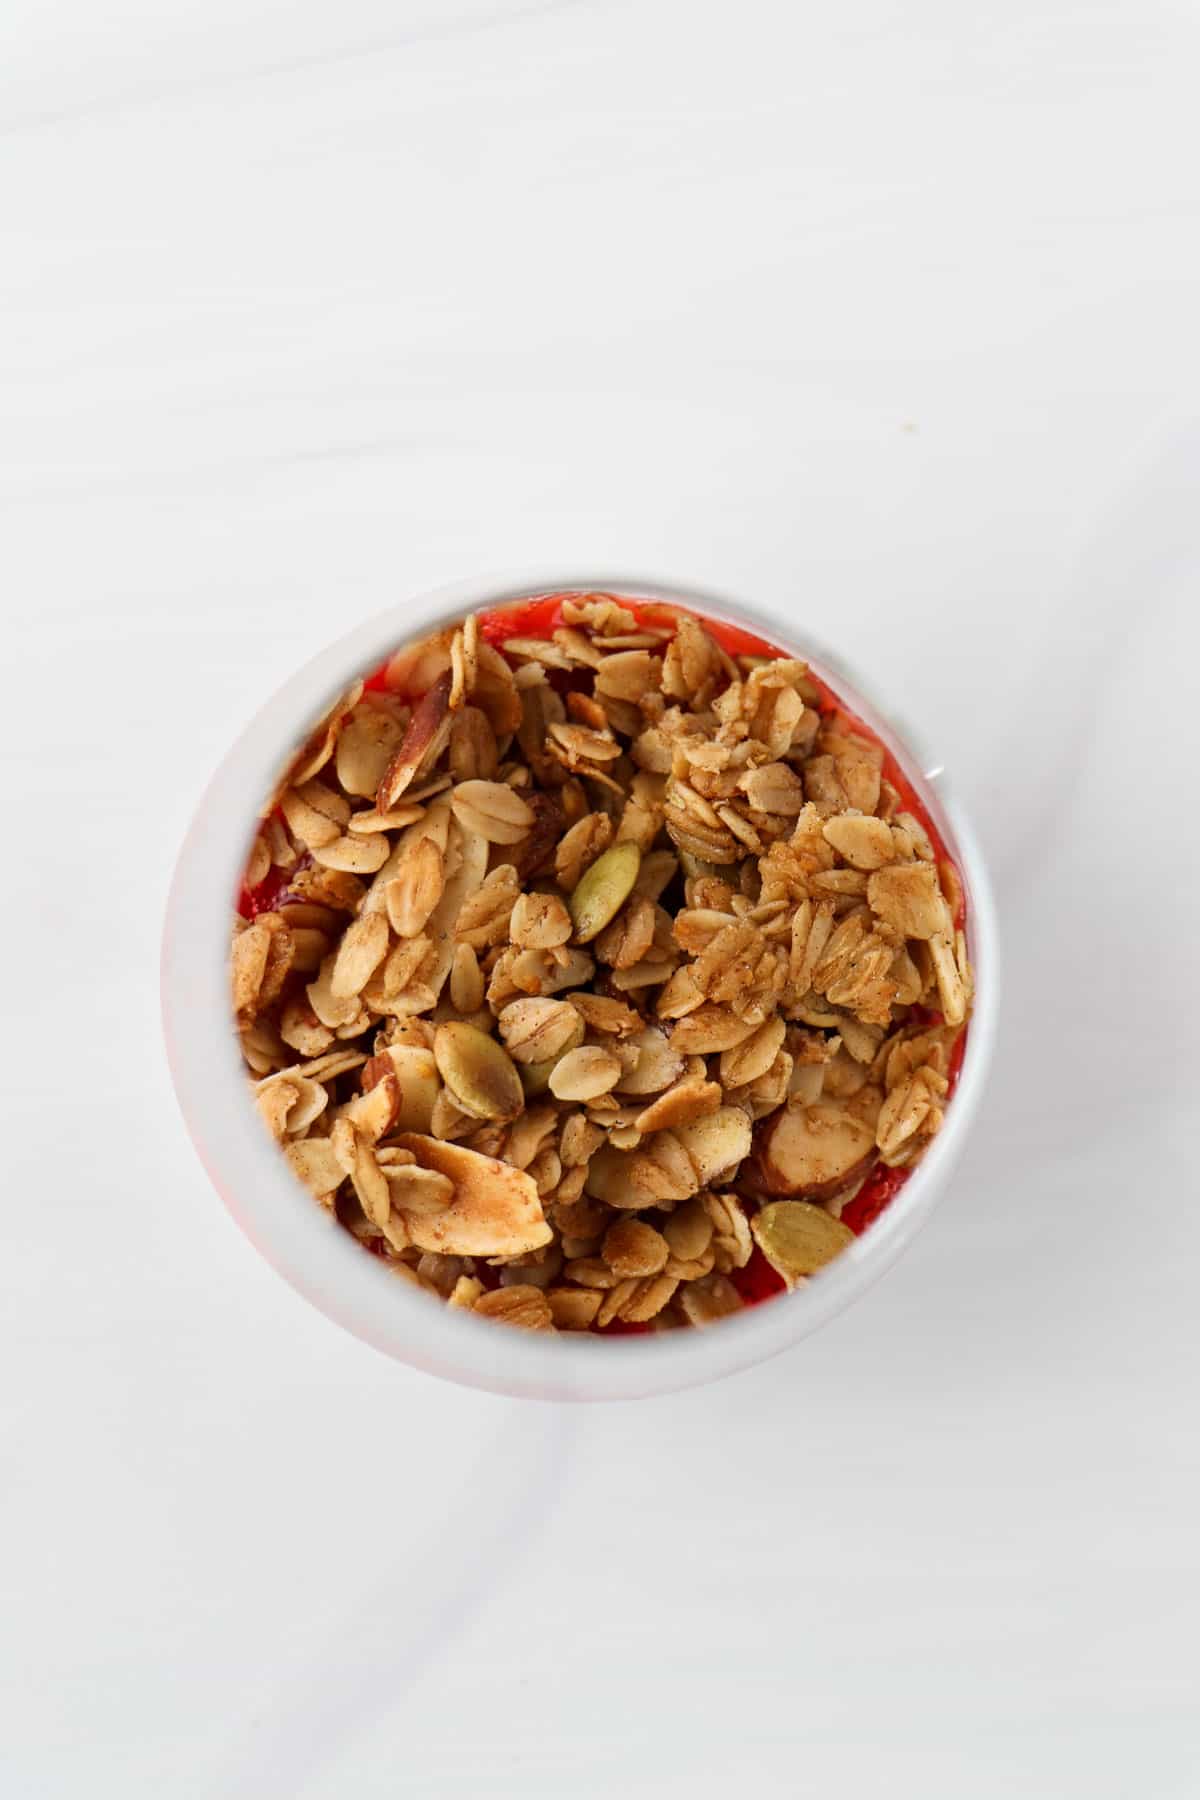 Overhead view of granola in a glass.